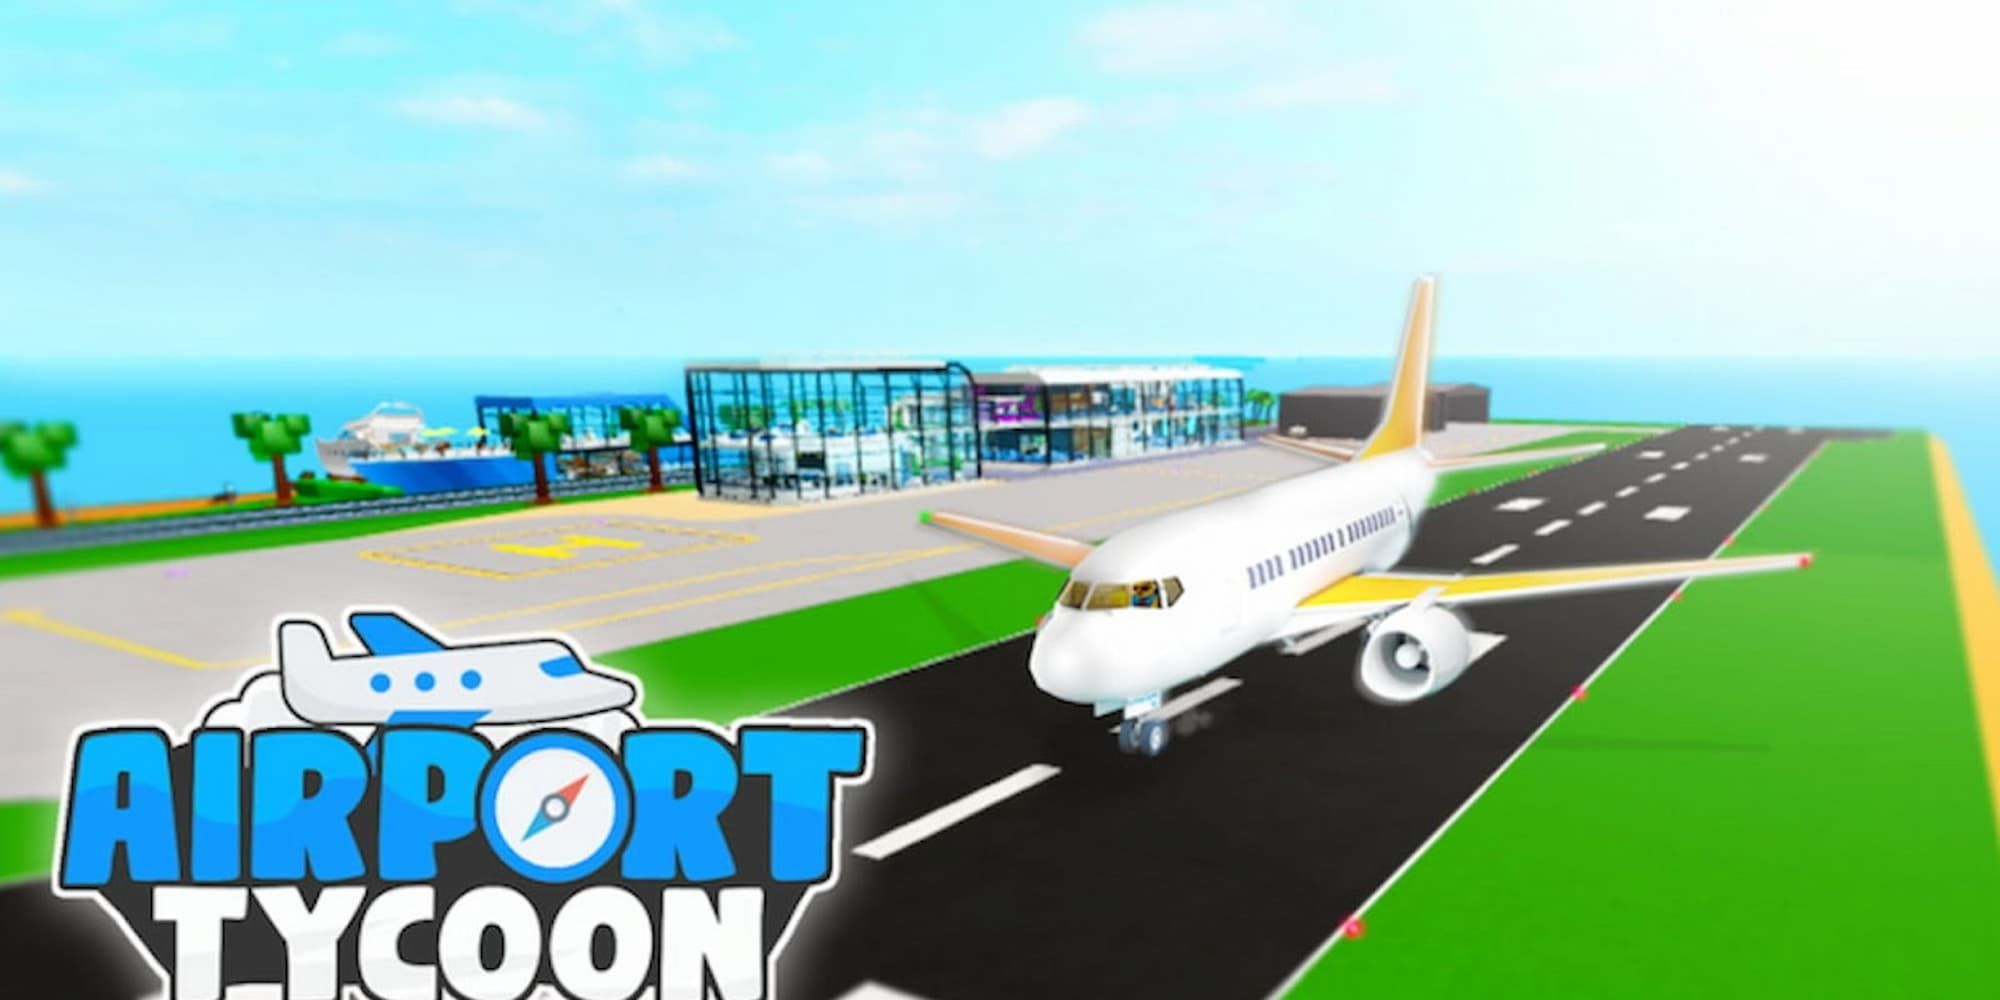 Roblox: Airport Tycoon logo and plane on the runway